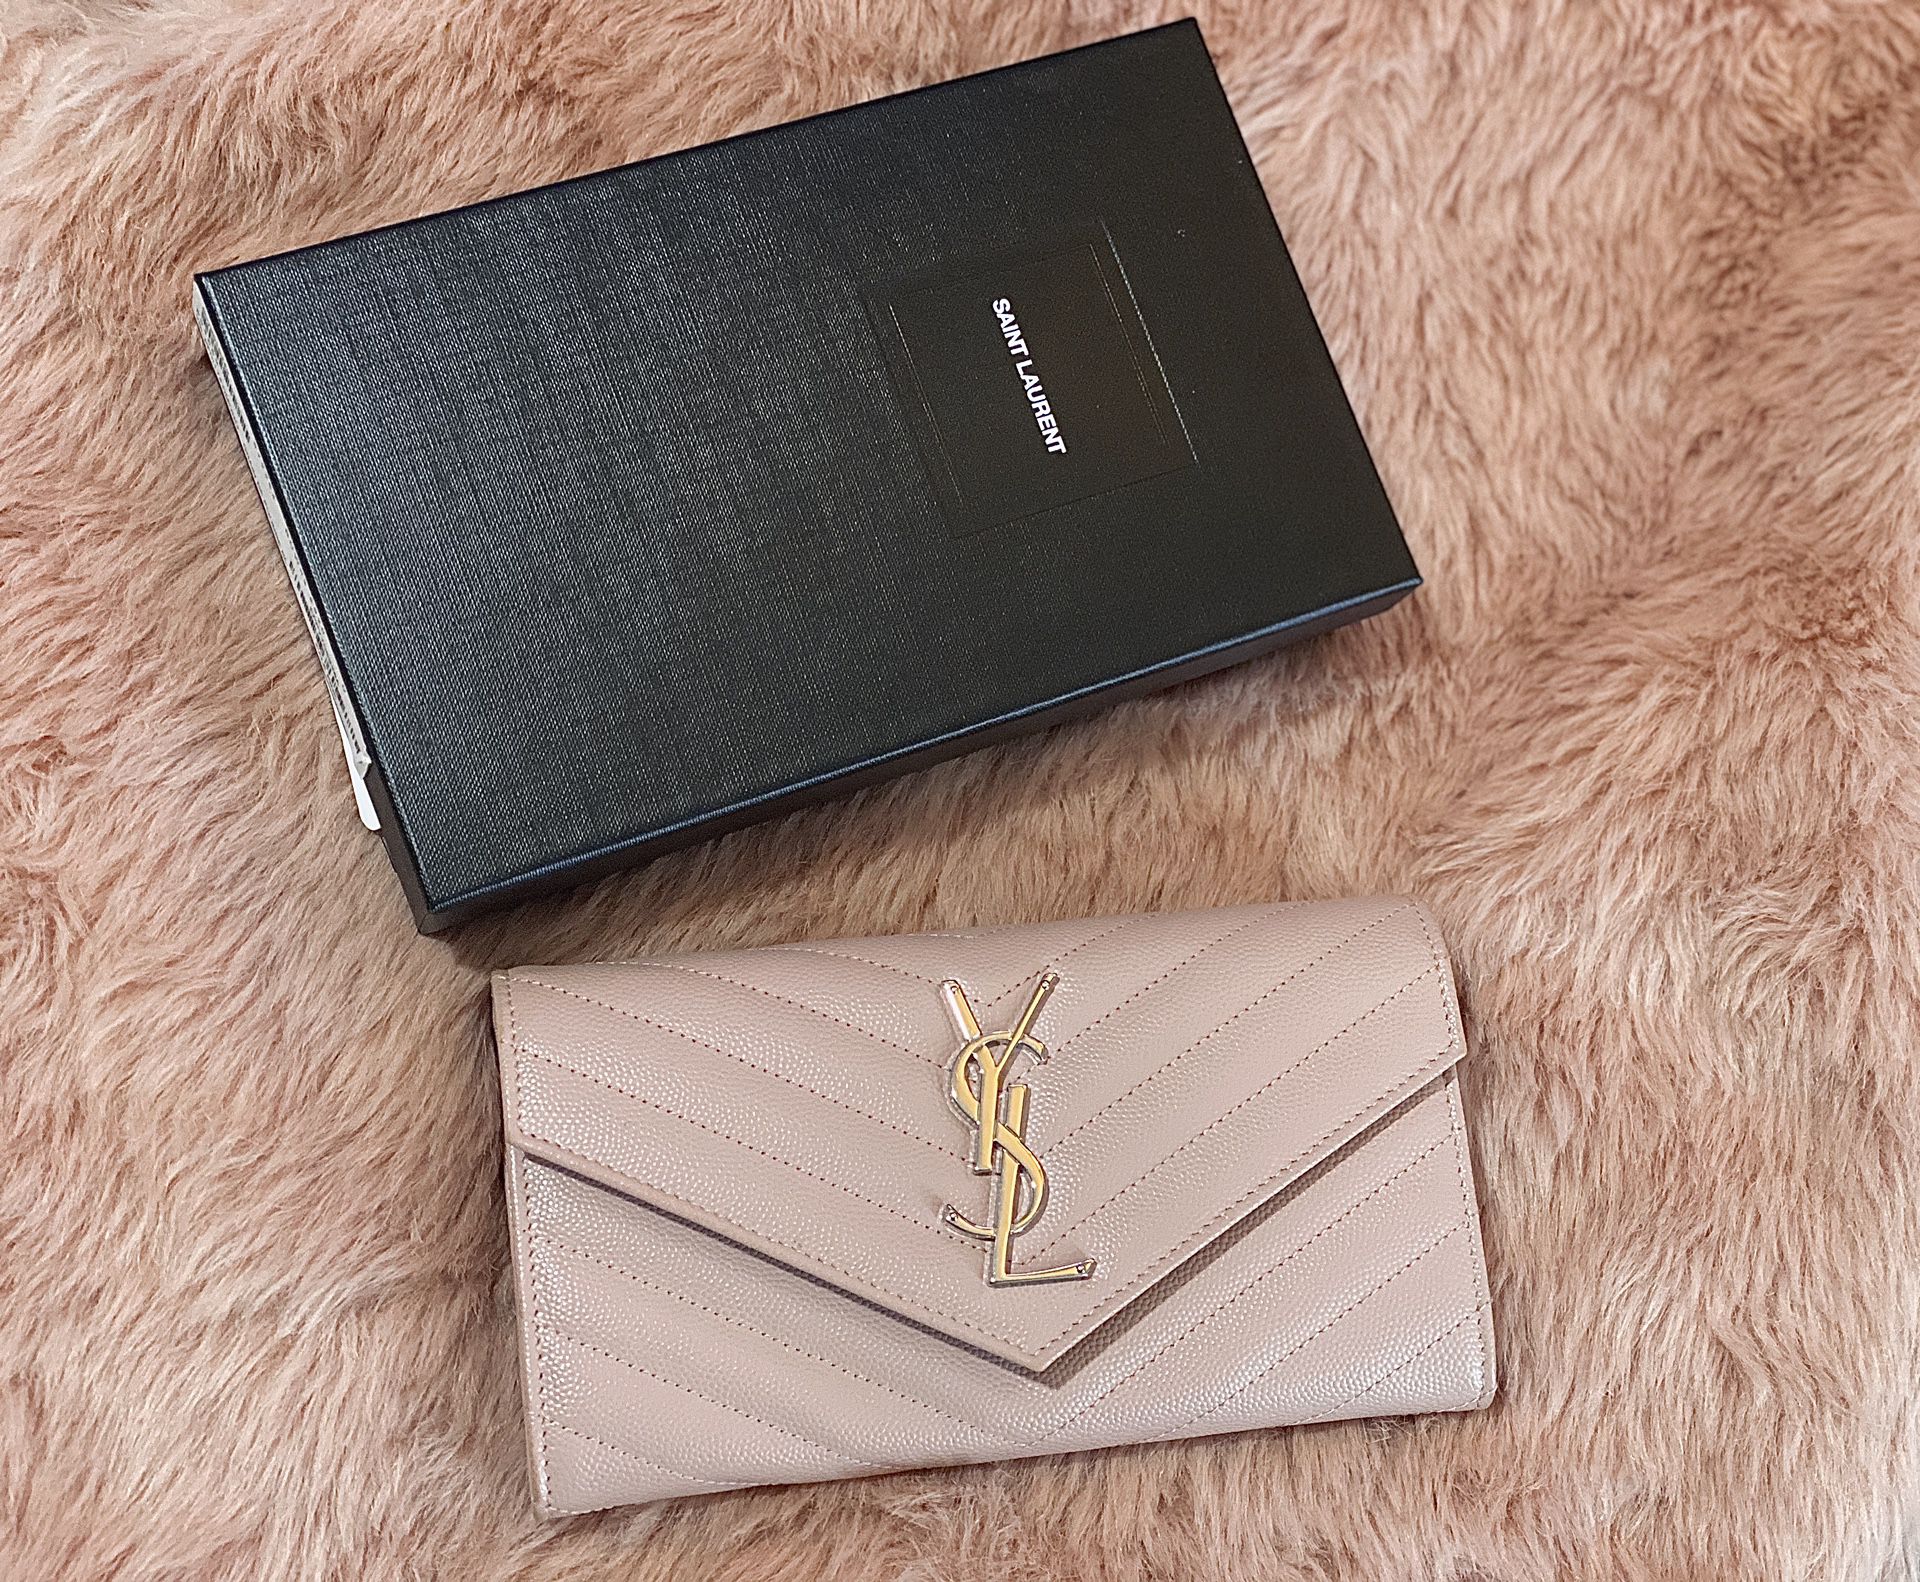 Saint laurent- YSL WALLET I have this one used 2 day good condition